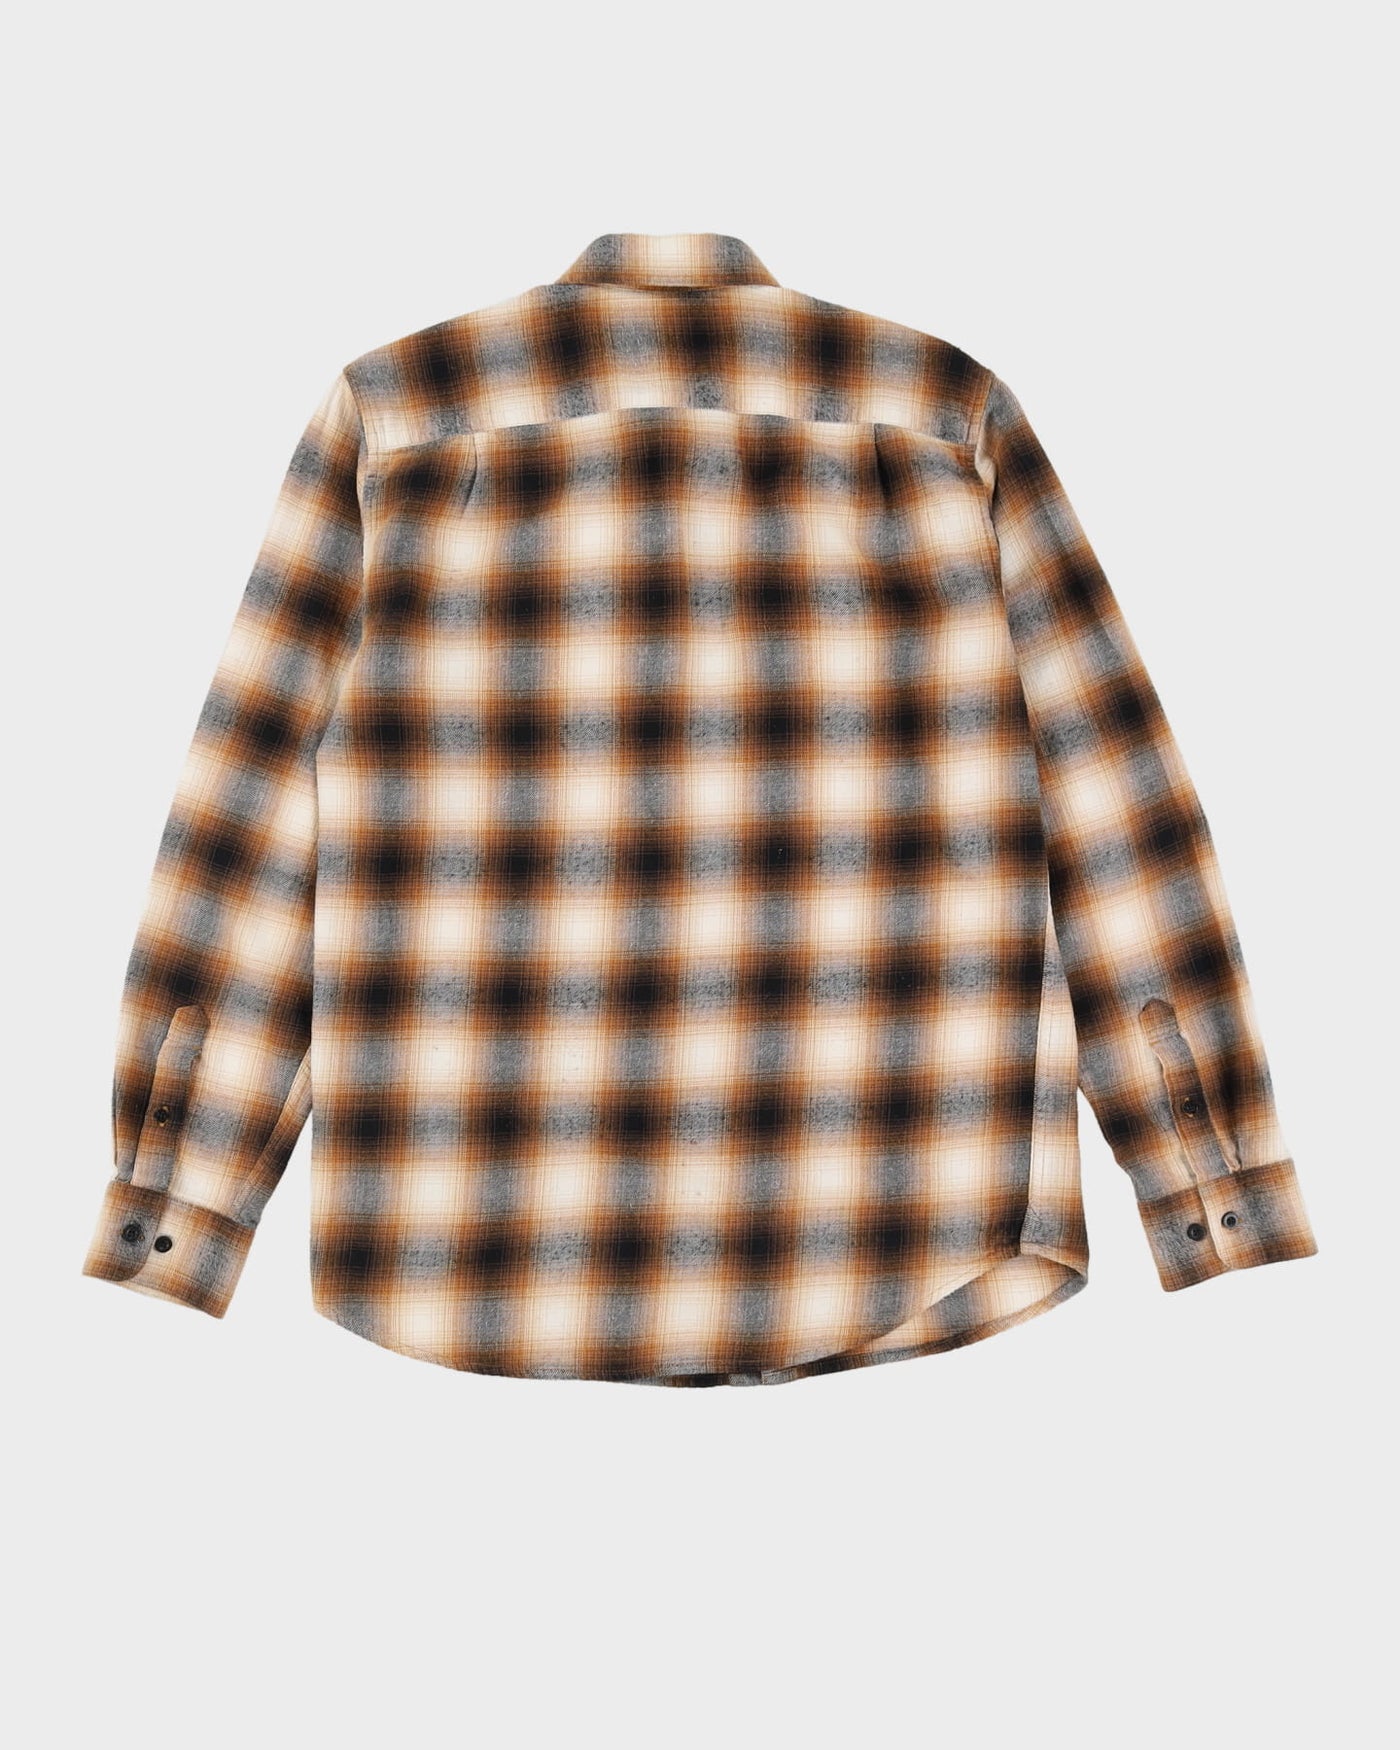 Obey Brown Check Patterned Flannel Shirt - M